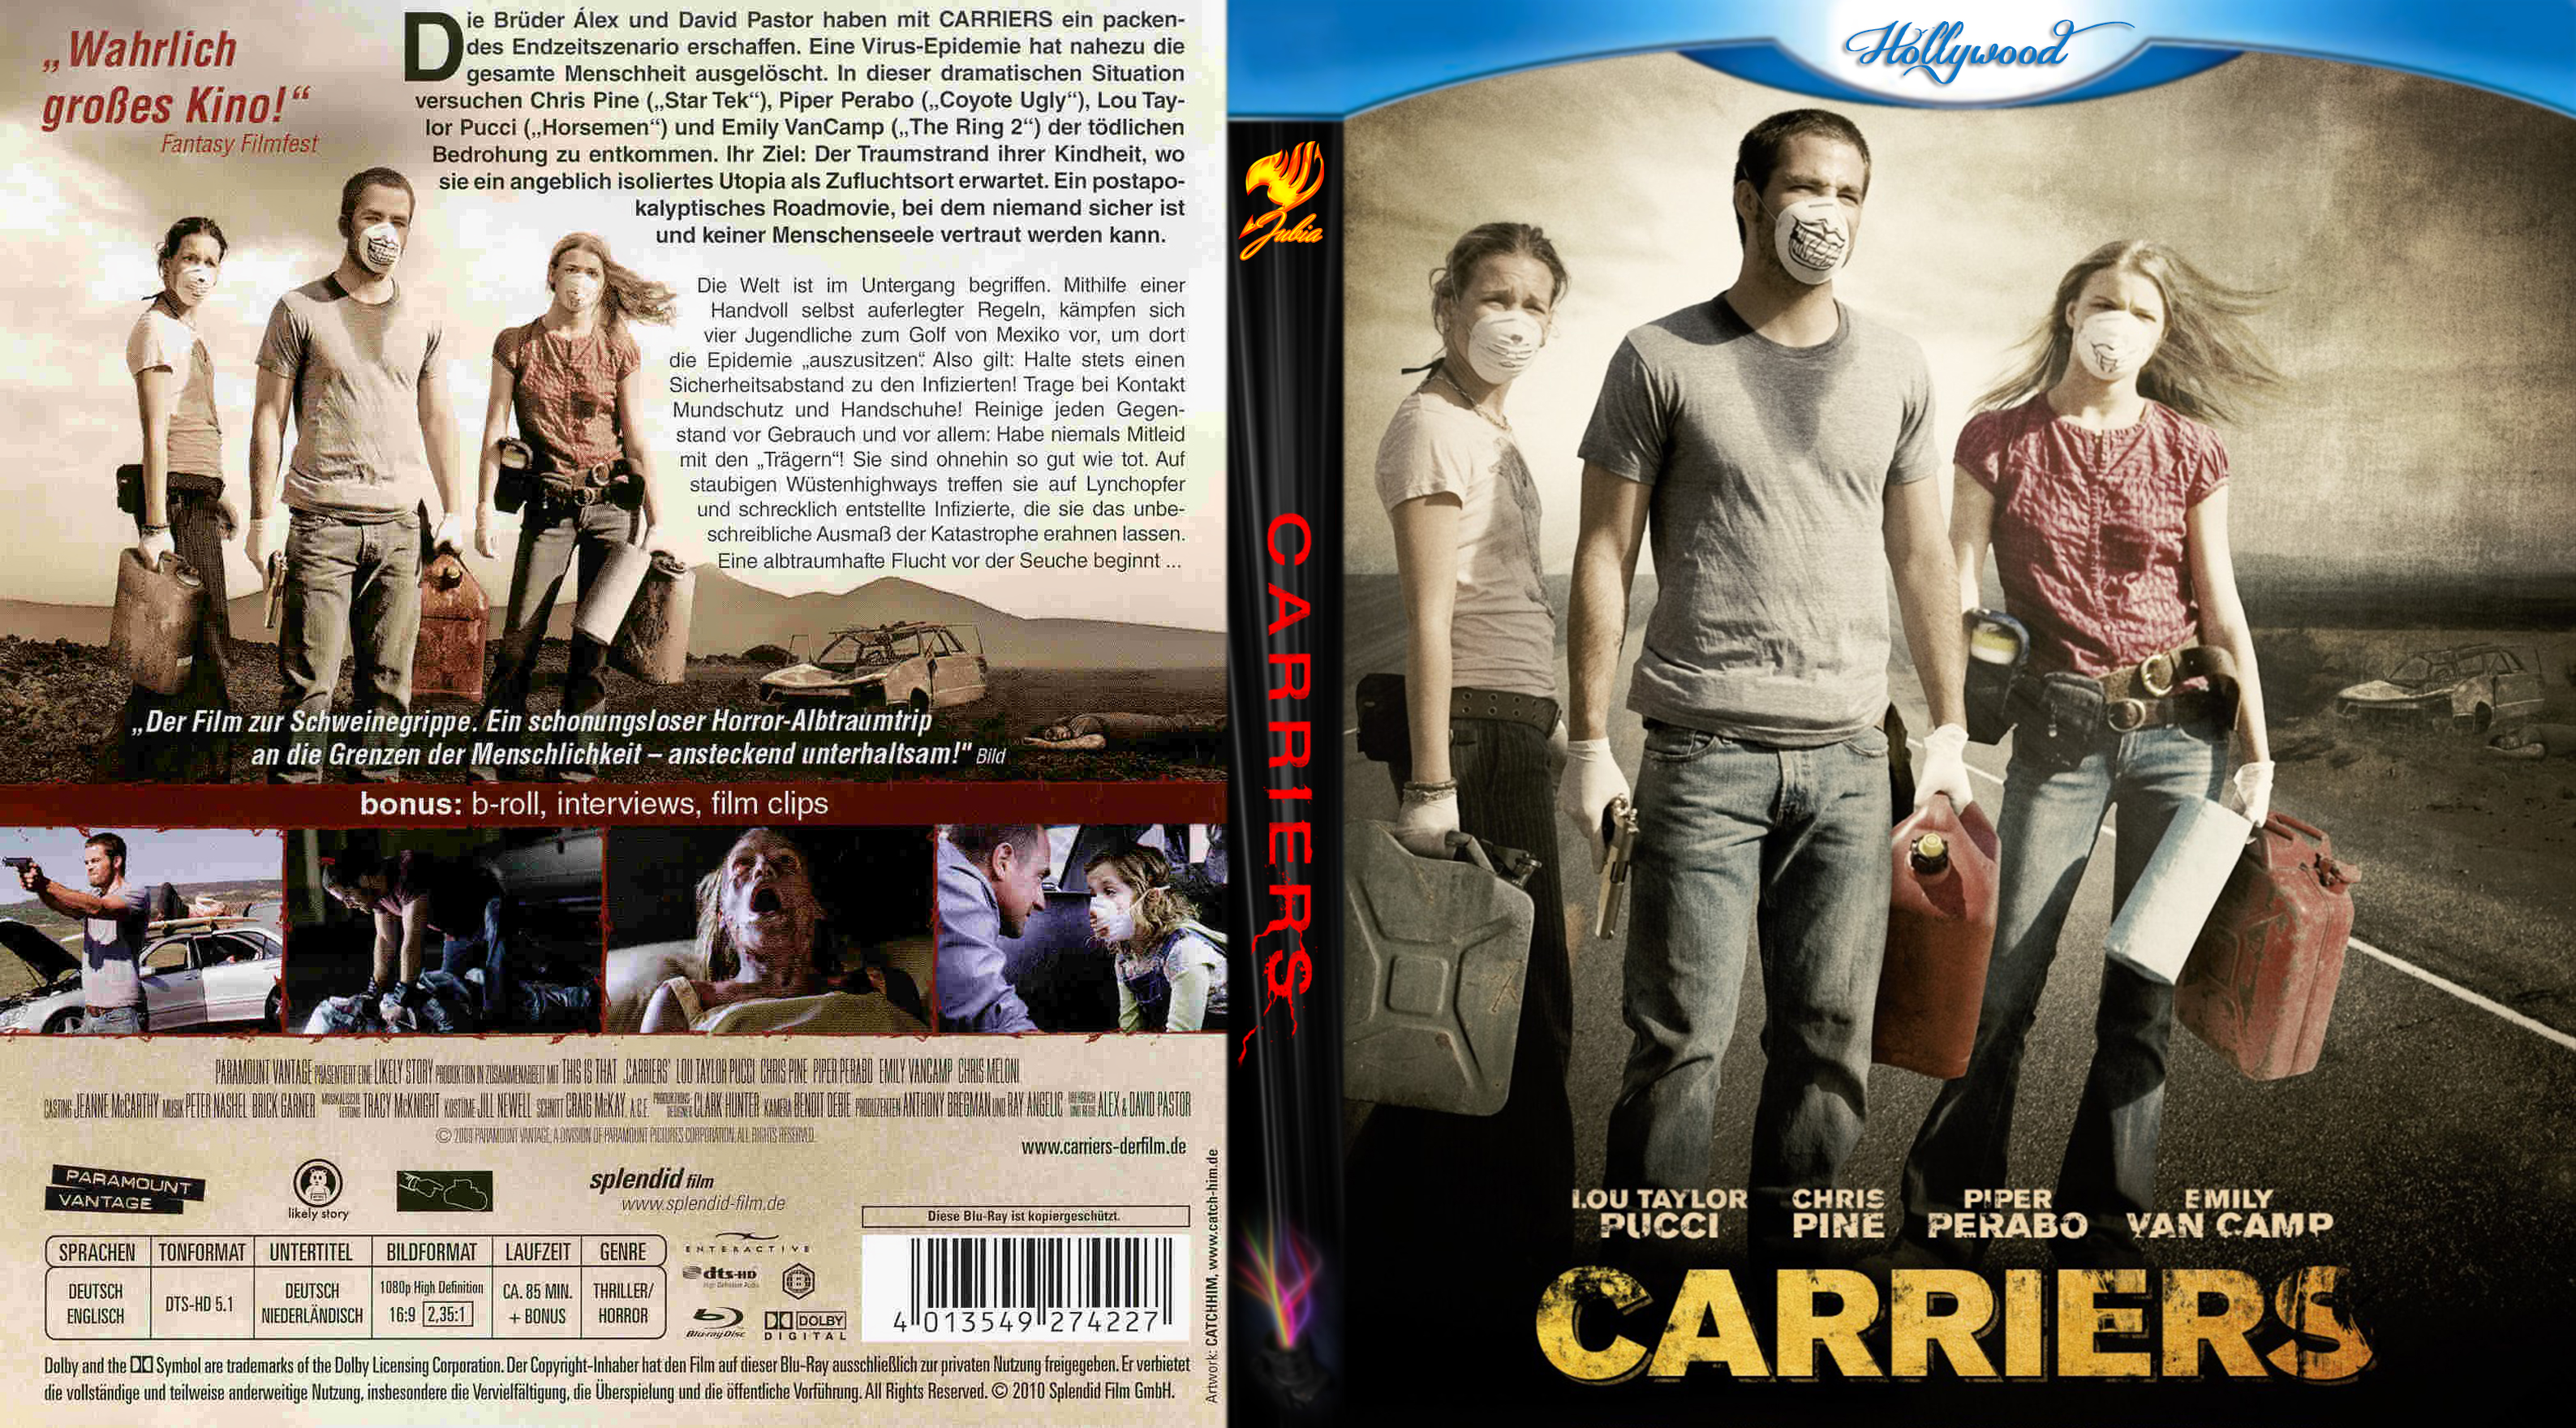 carriers movie